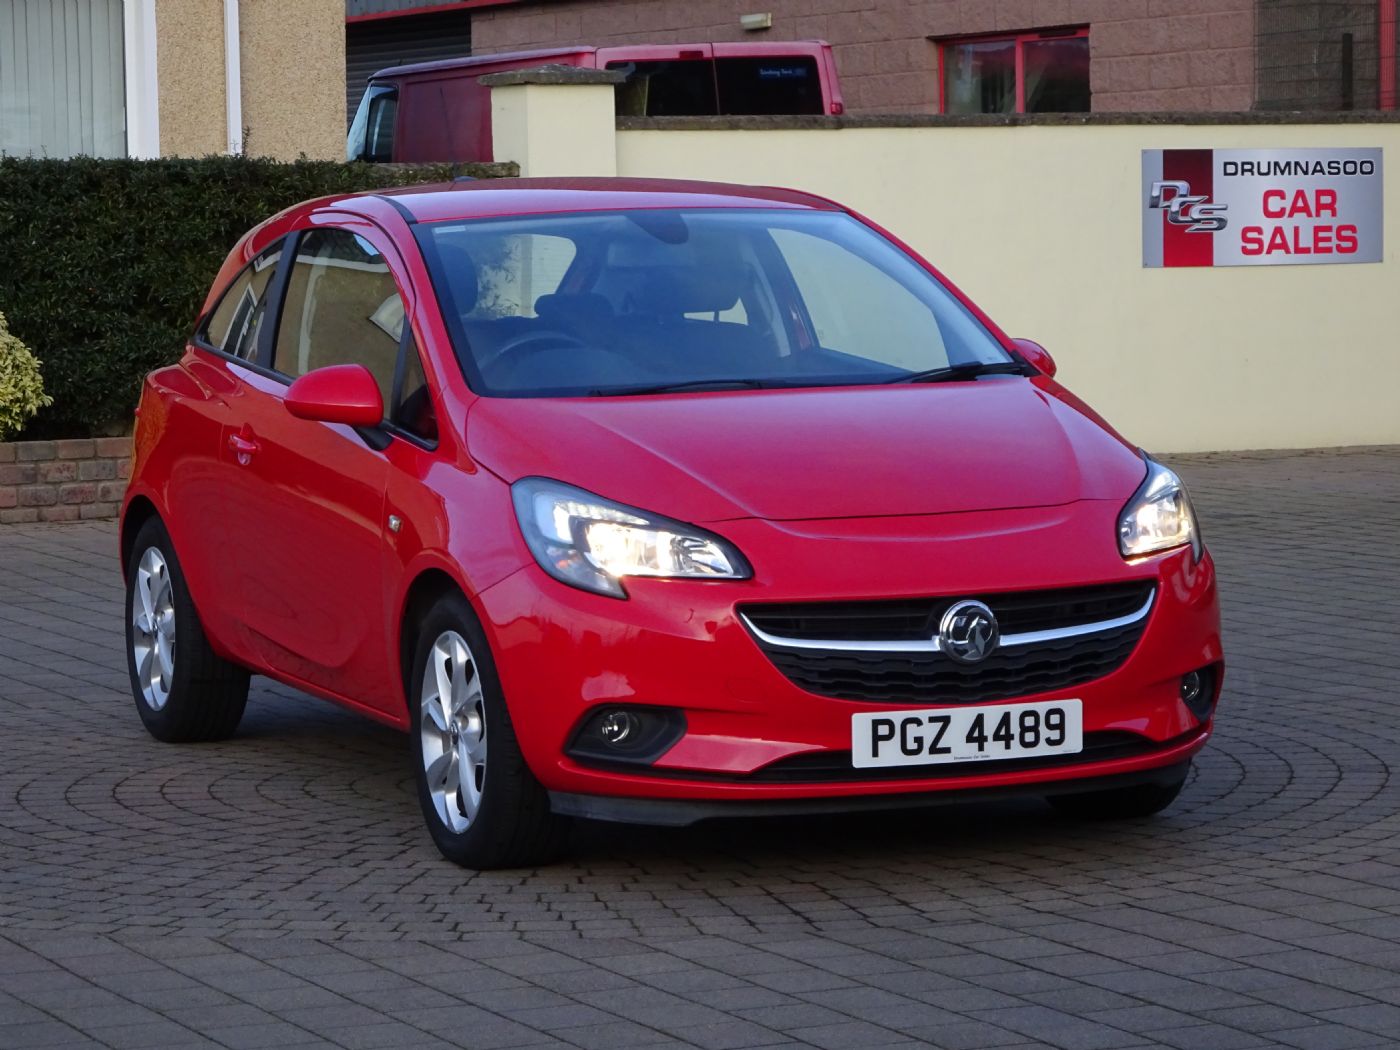 Vauxhall Corsa  Energy 1.4 3Dr, Heated front seats